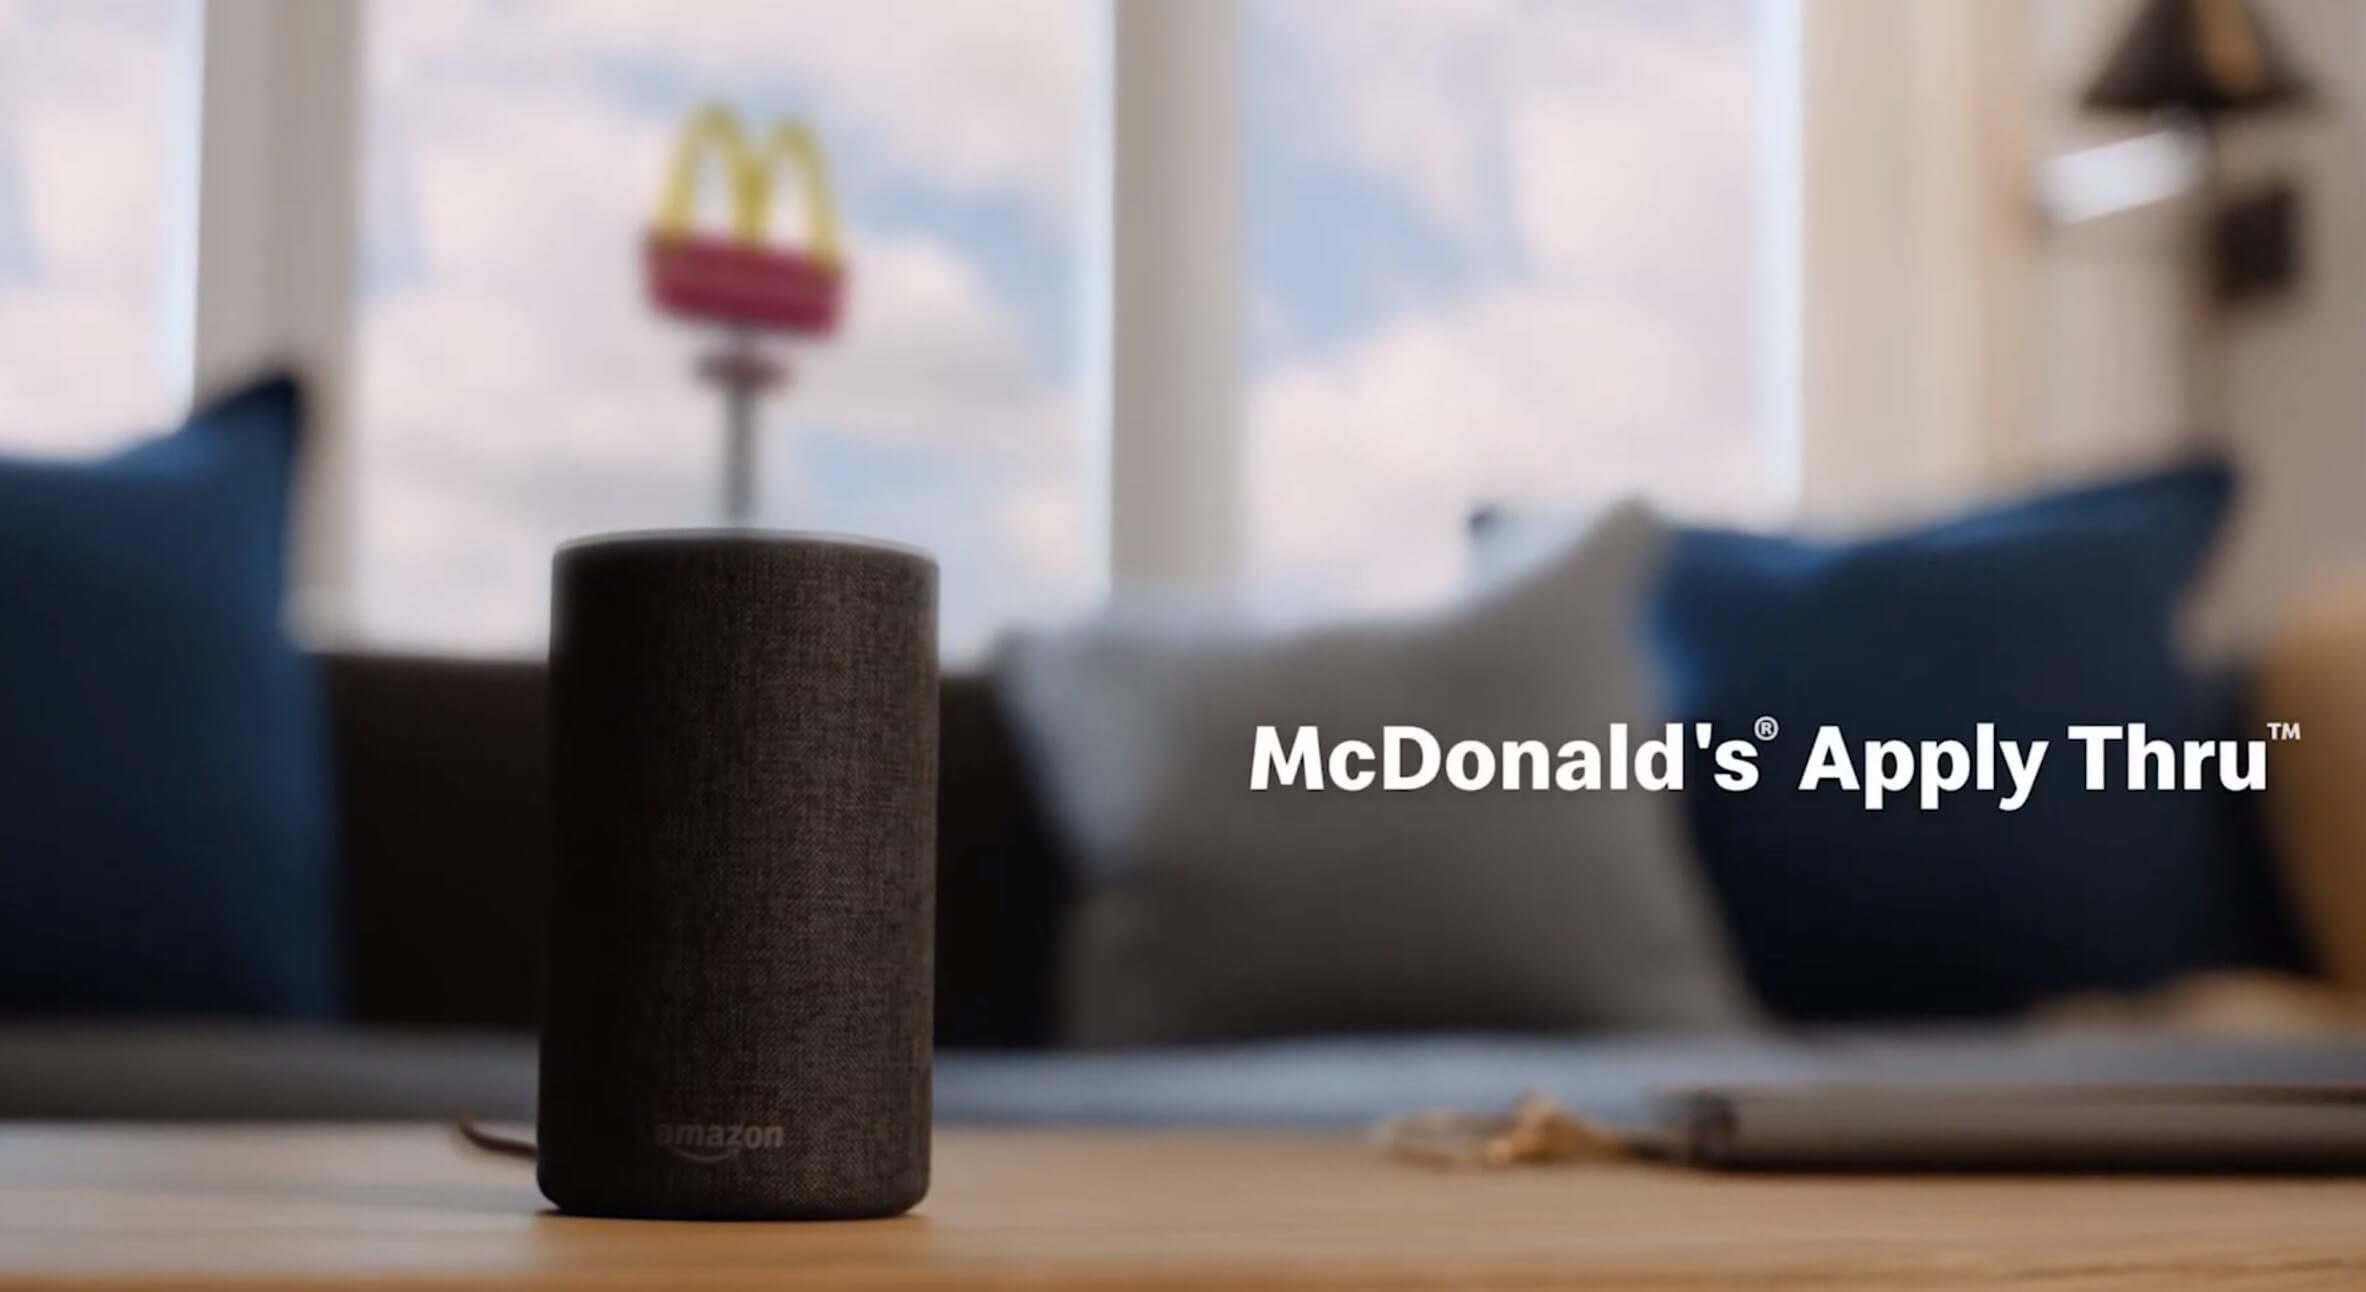 You can now apply for a job at McDonald's using Alexa and Google Assistant